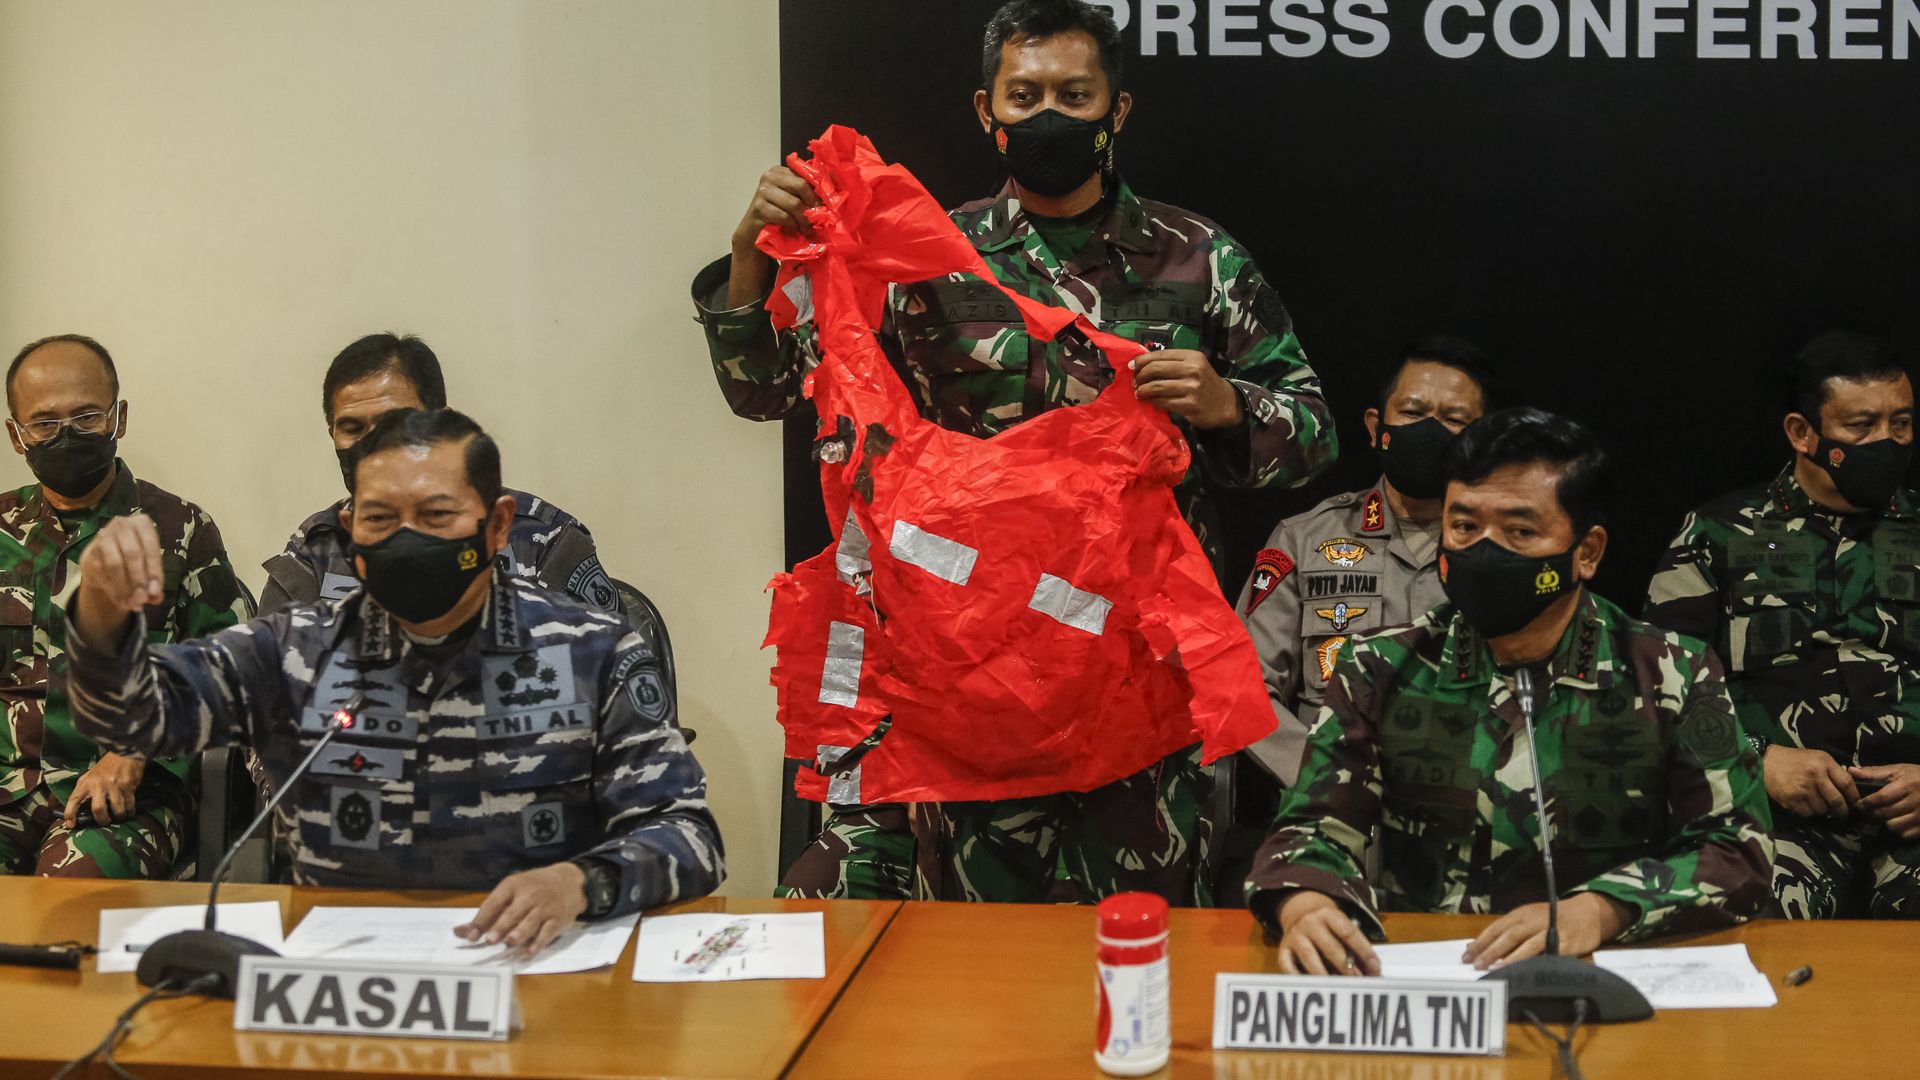 An Indonesian military officer shows a crew escape suit from sunken Indonesian Navy submarine during a press conference at Ngurah Rai Military Air Base in Kuta, Bali, Indonesia on Sunday. 